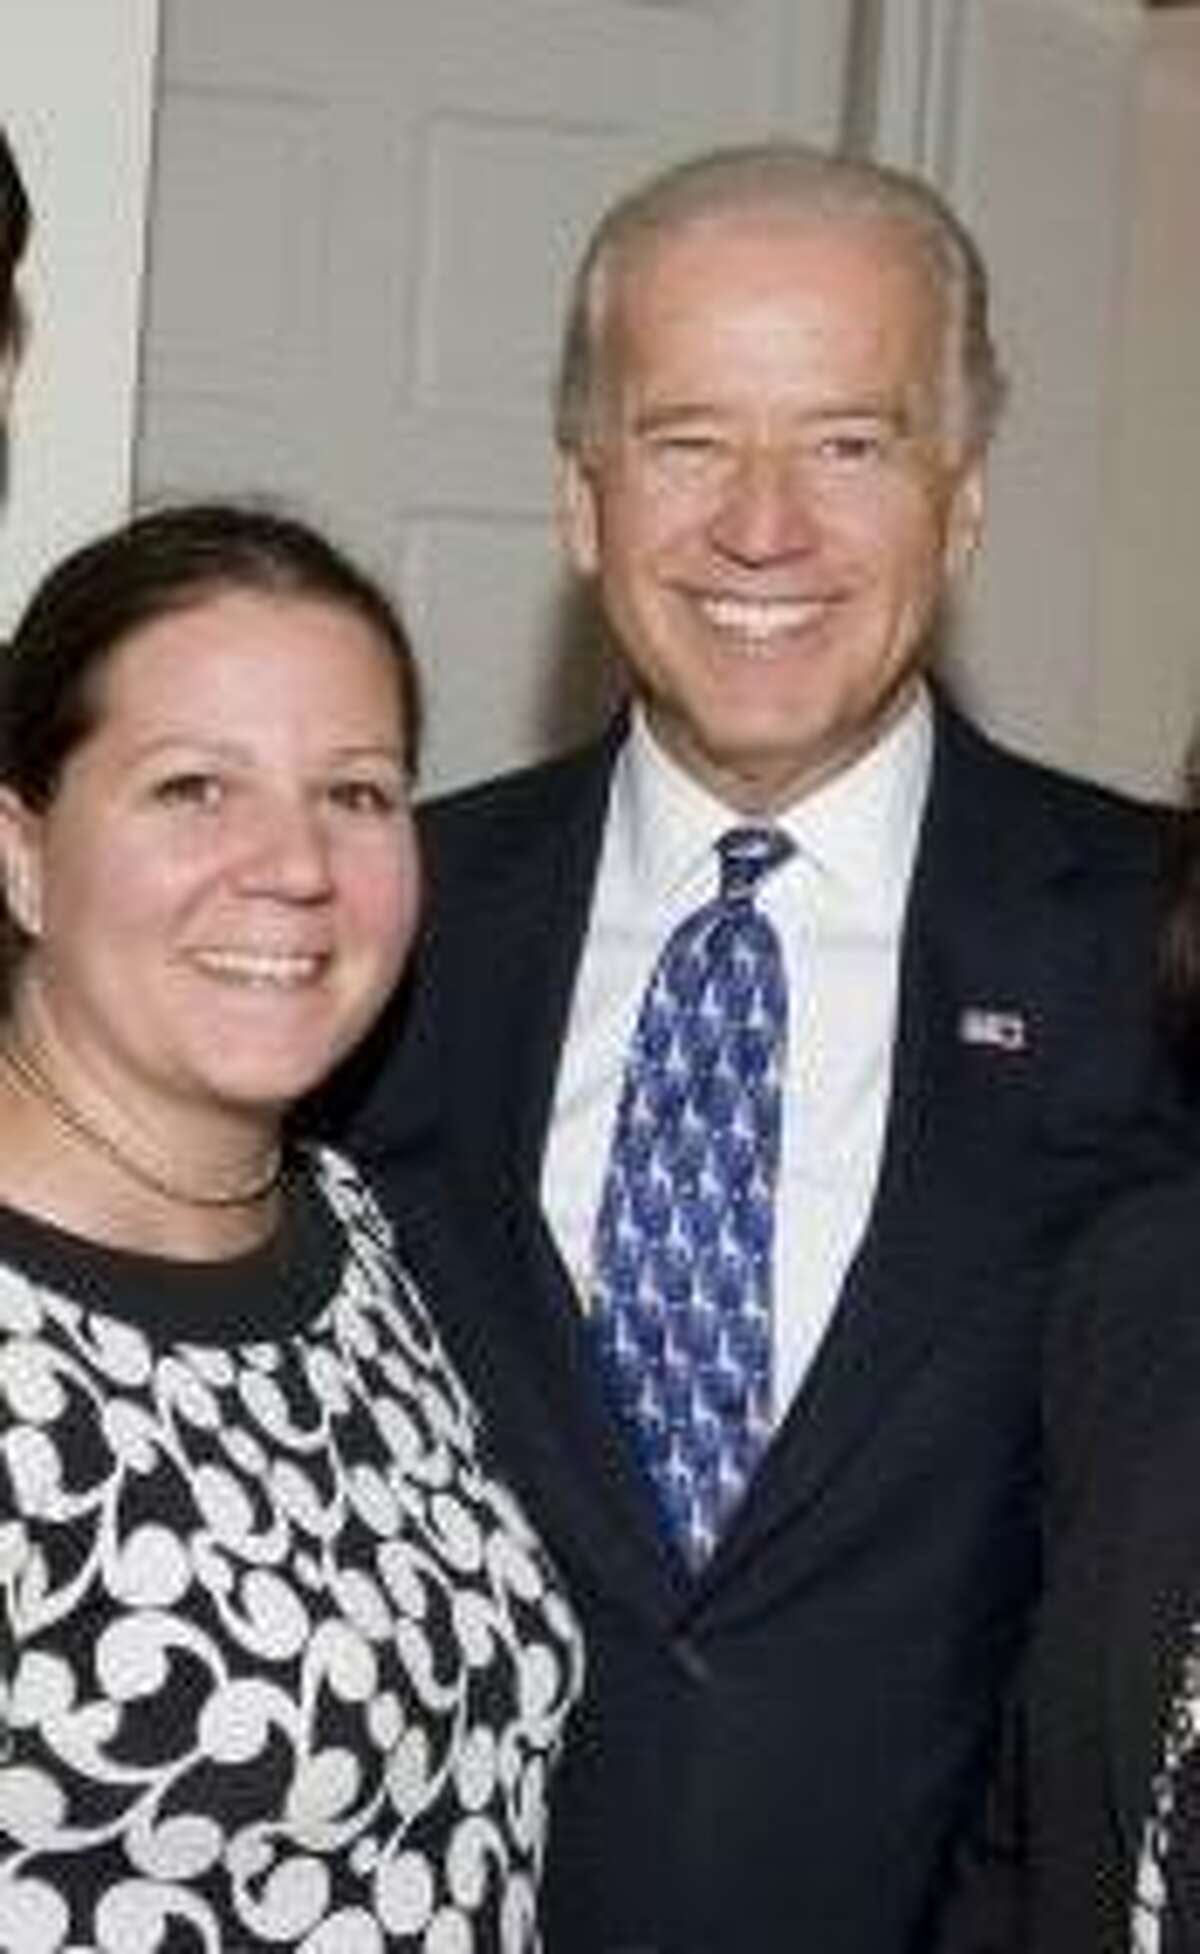 Amy Lappos, left, with then-Vice President Joe Biden at a 2009 fundraising event in Greenwich.